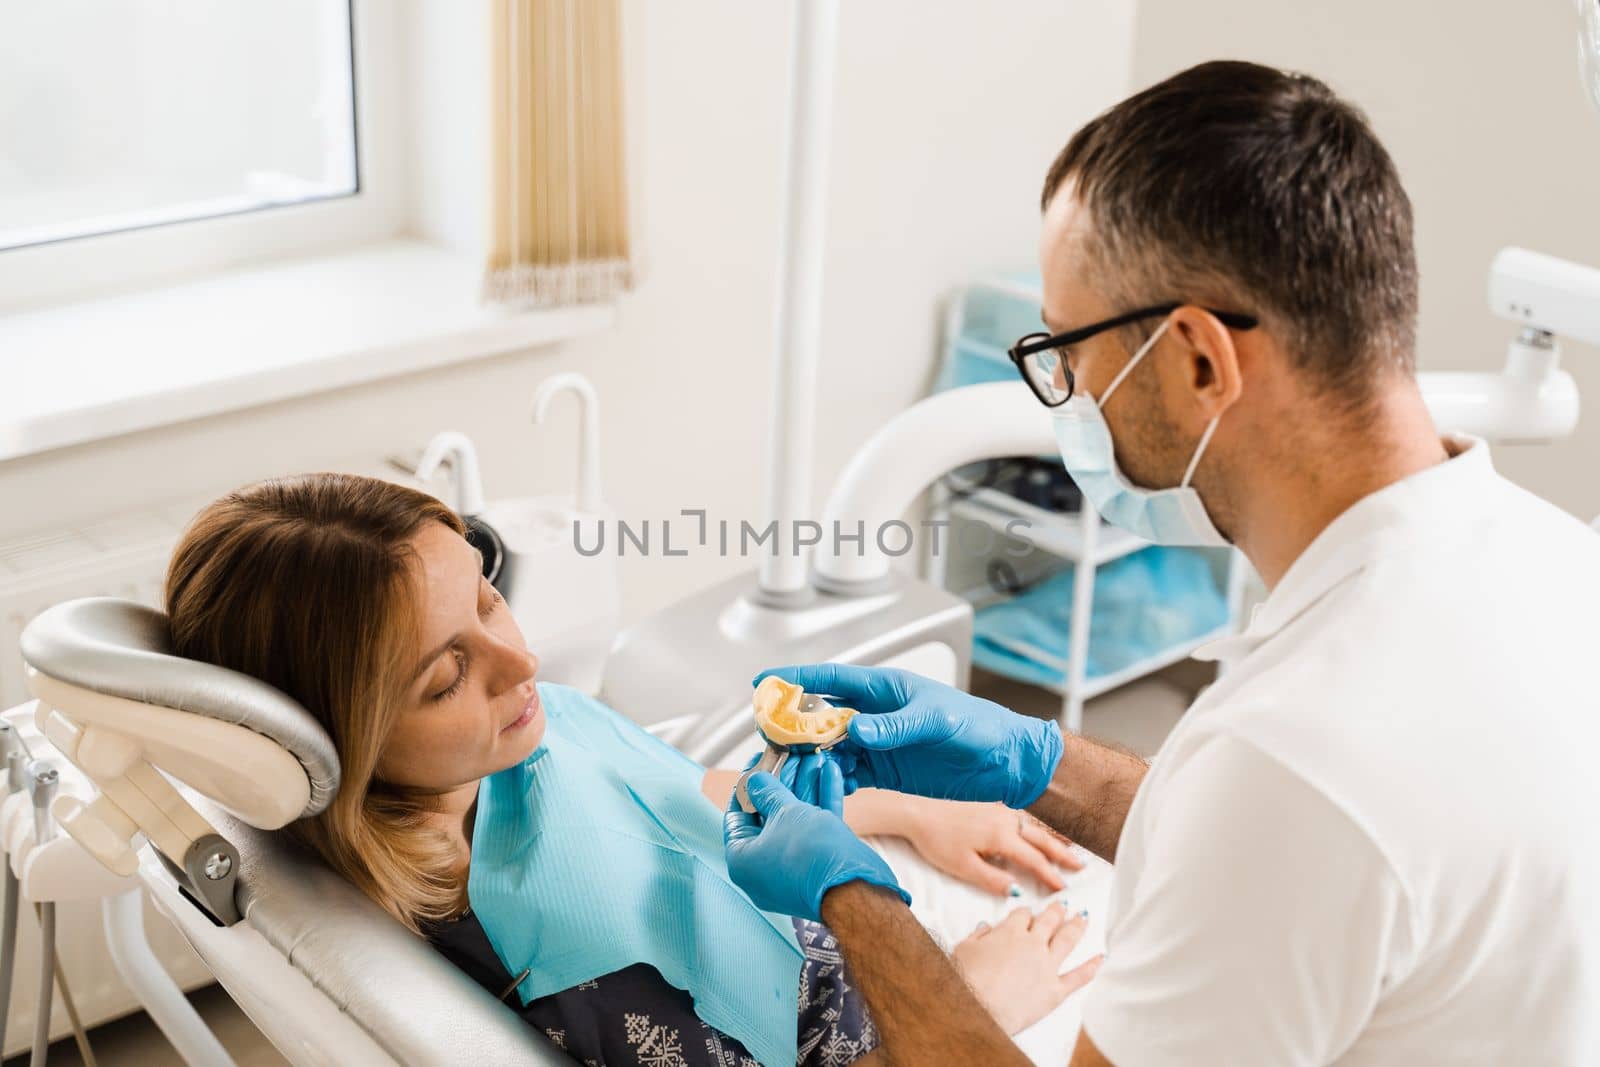 Dentist showing cast of teeth of patient woman before dental implantation. Procedure of creating dental prostheses, crowns and aligners